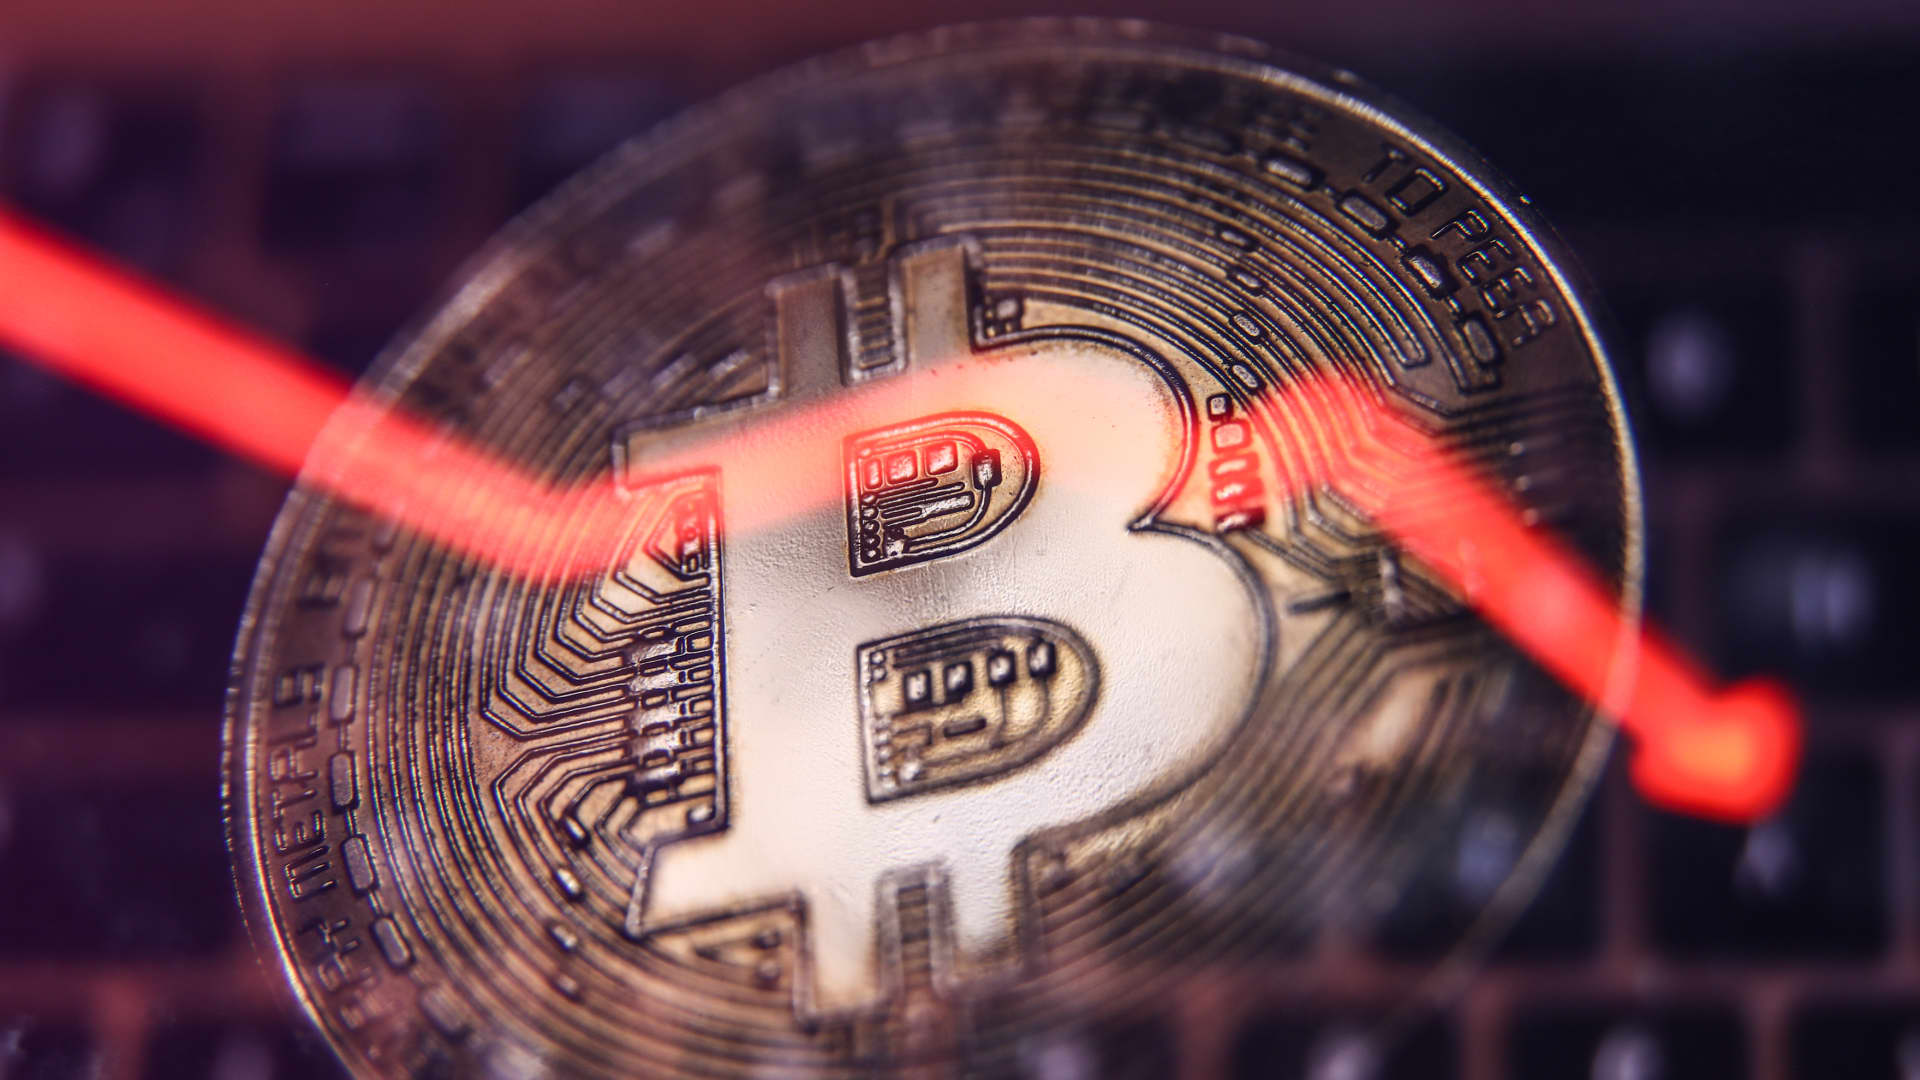 Bitcoin falls sharply ahead of Fed meeting and as investors weigh Binance concerns